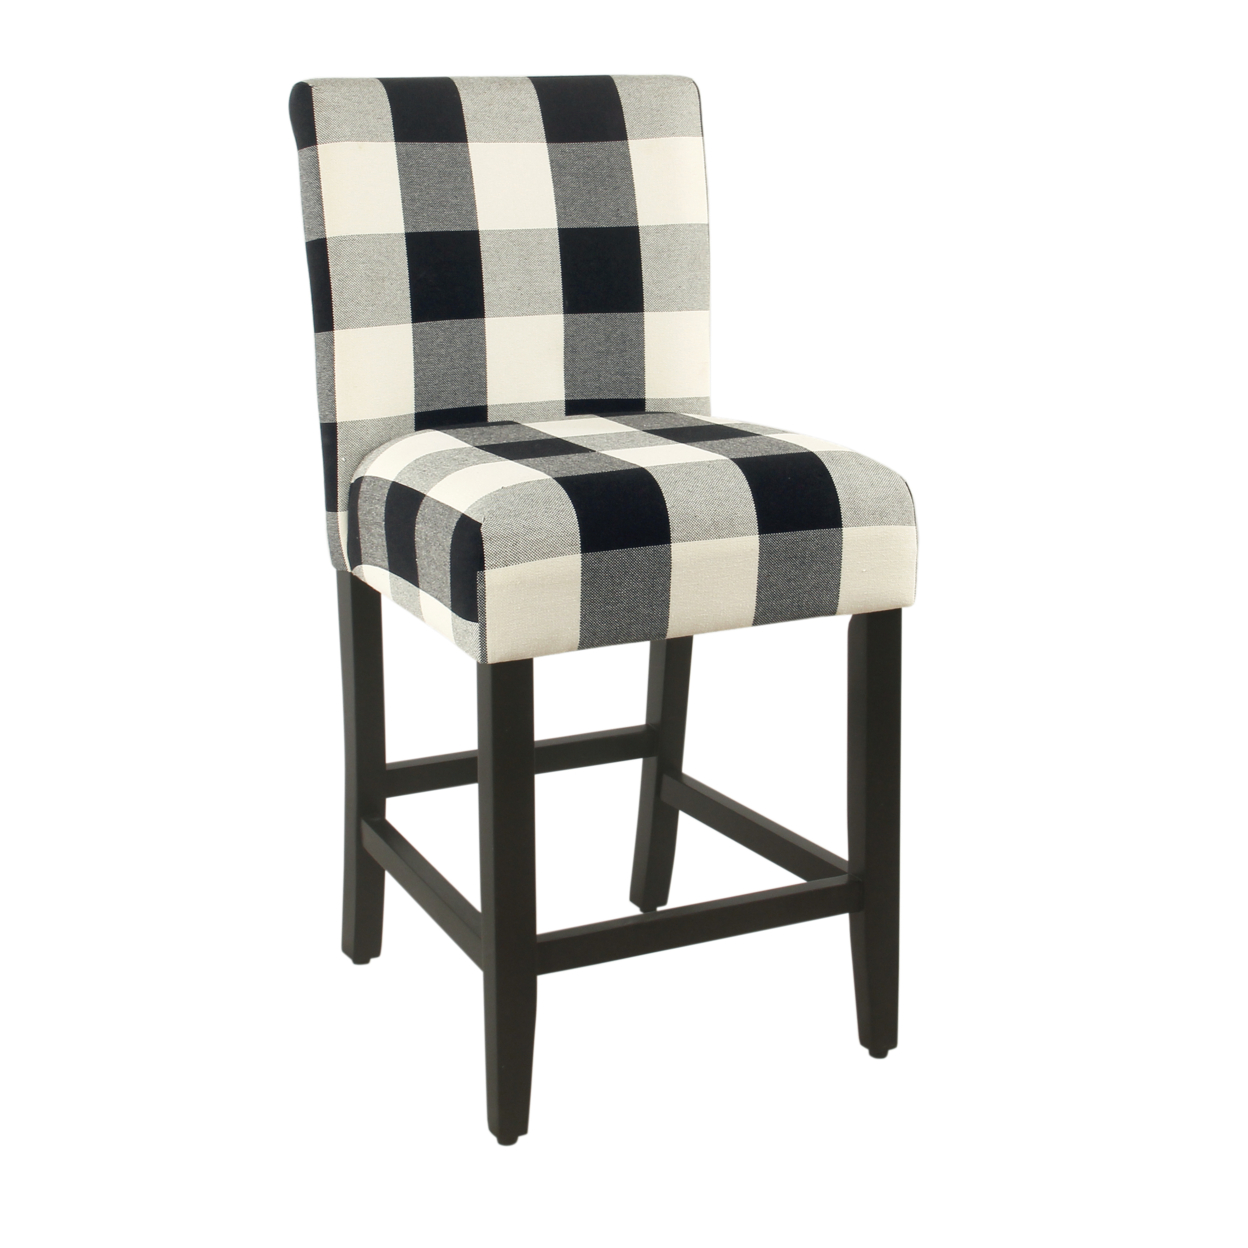 Wooden Counter Height Stool With Plaid Pattern Fabric Upholstery, Black And White- Saltoro Sherpi